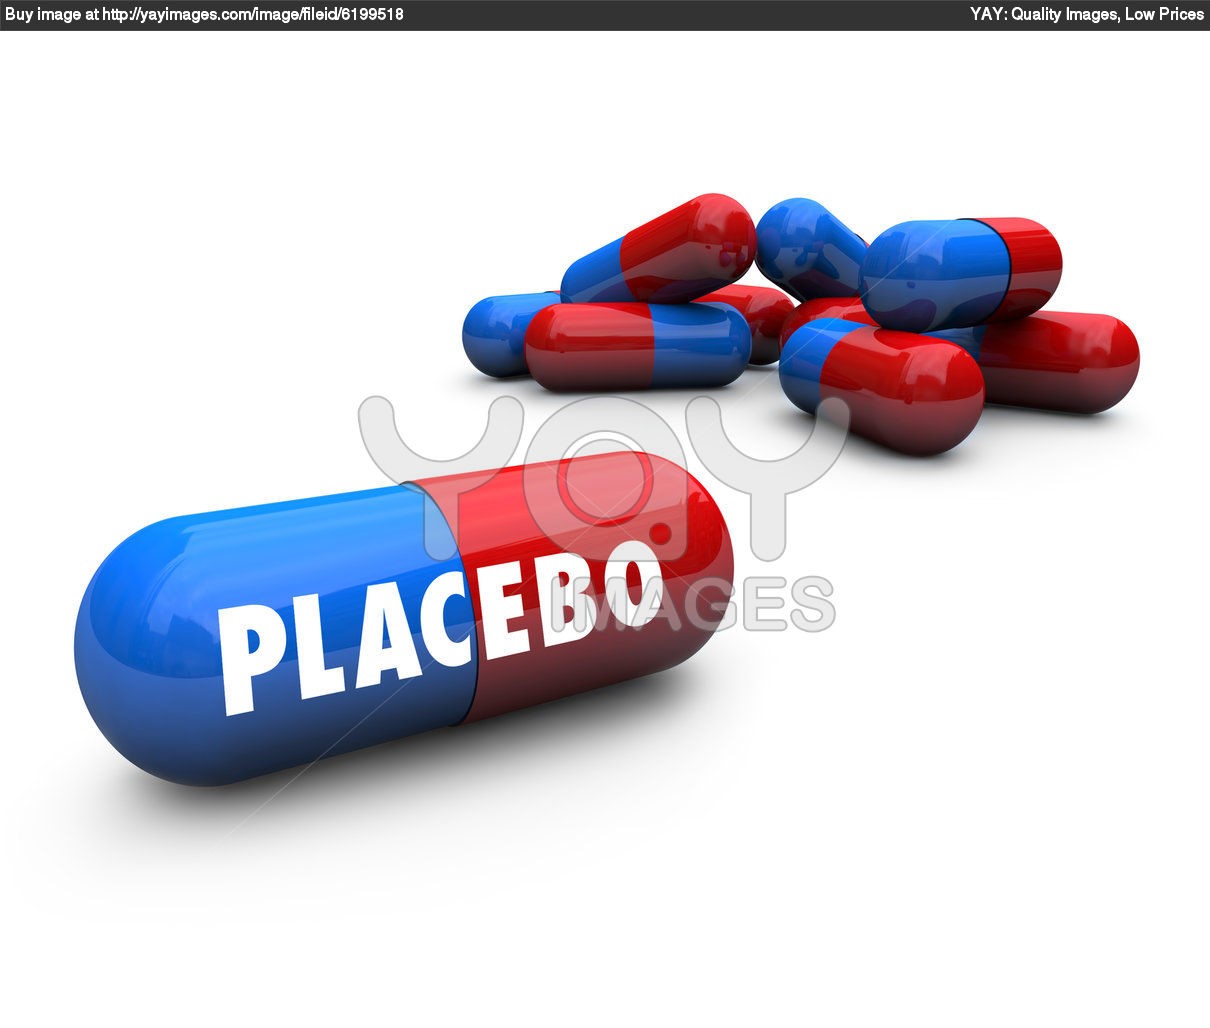 The Placebo Response to Manual Therapy